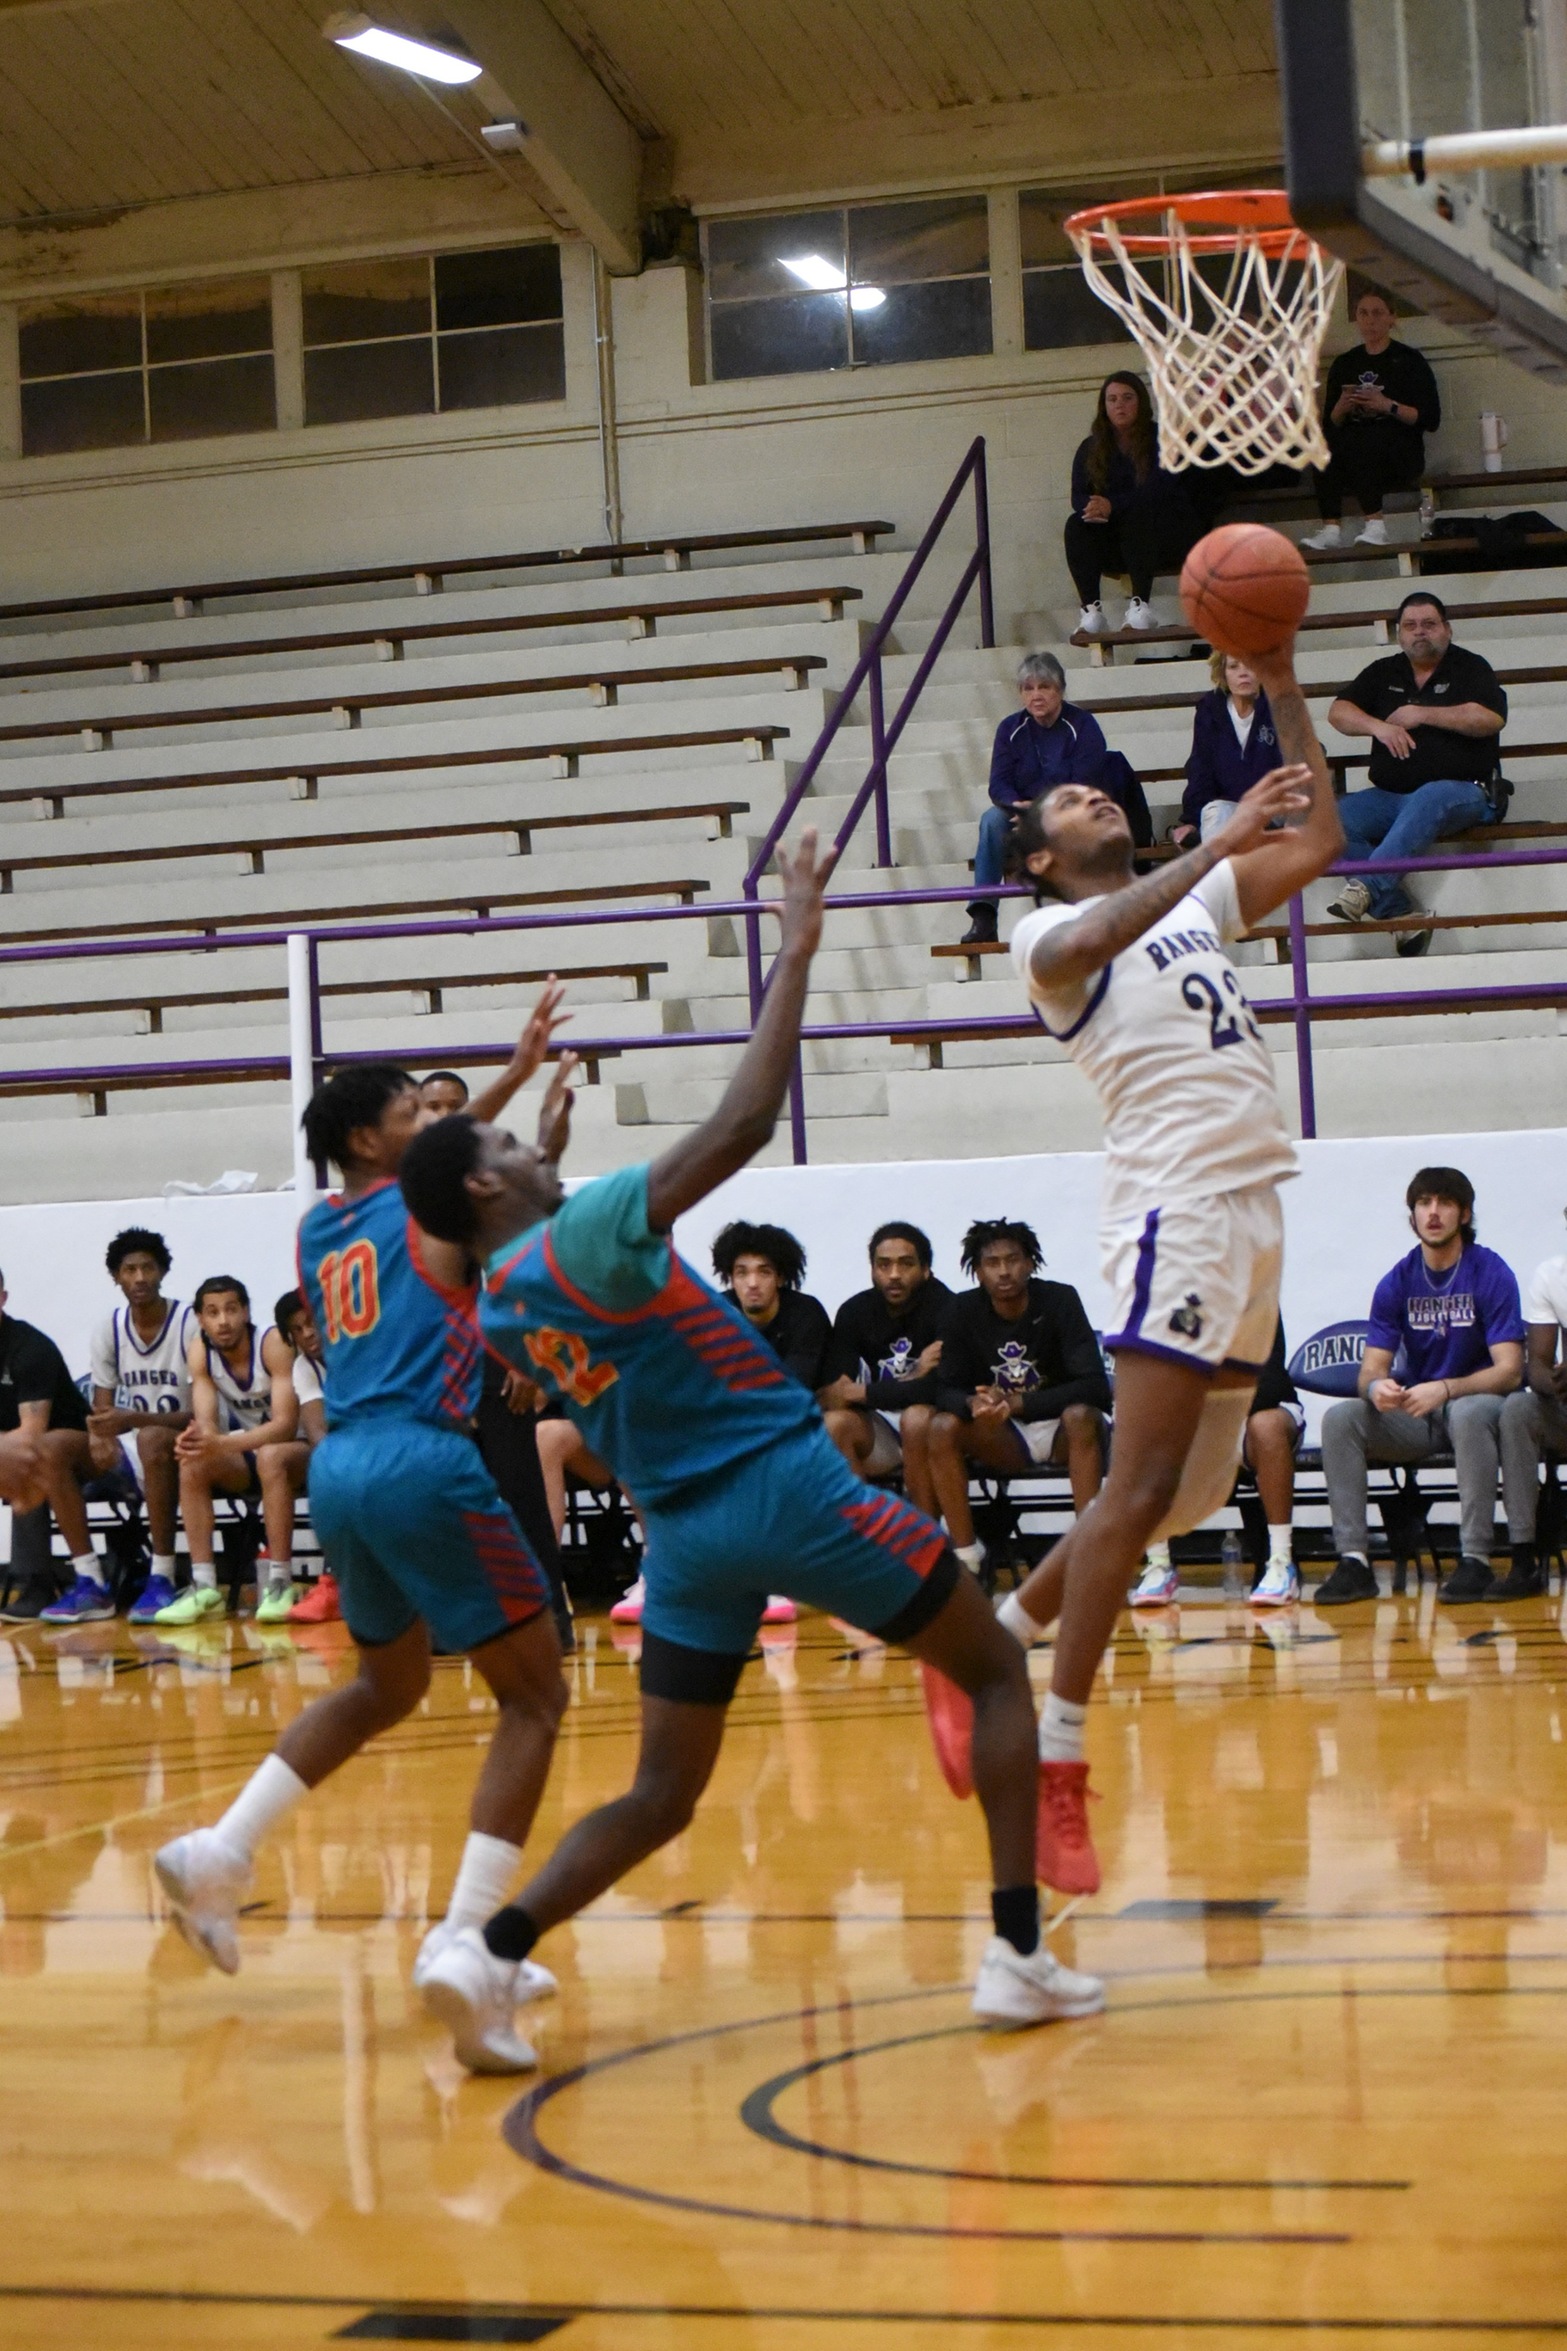 Ranger College wins in a close match against Southwestern Christian College with a final score of 80-74